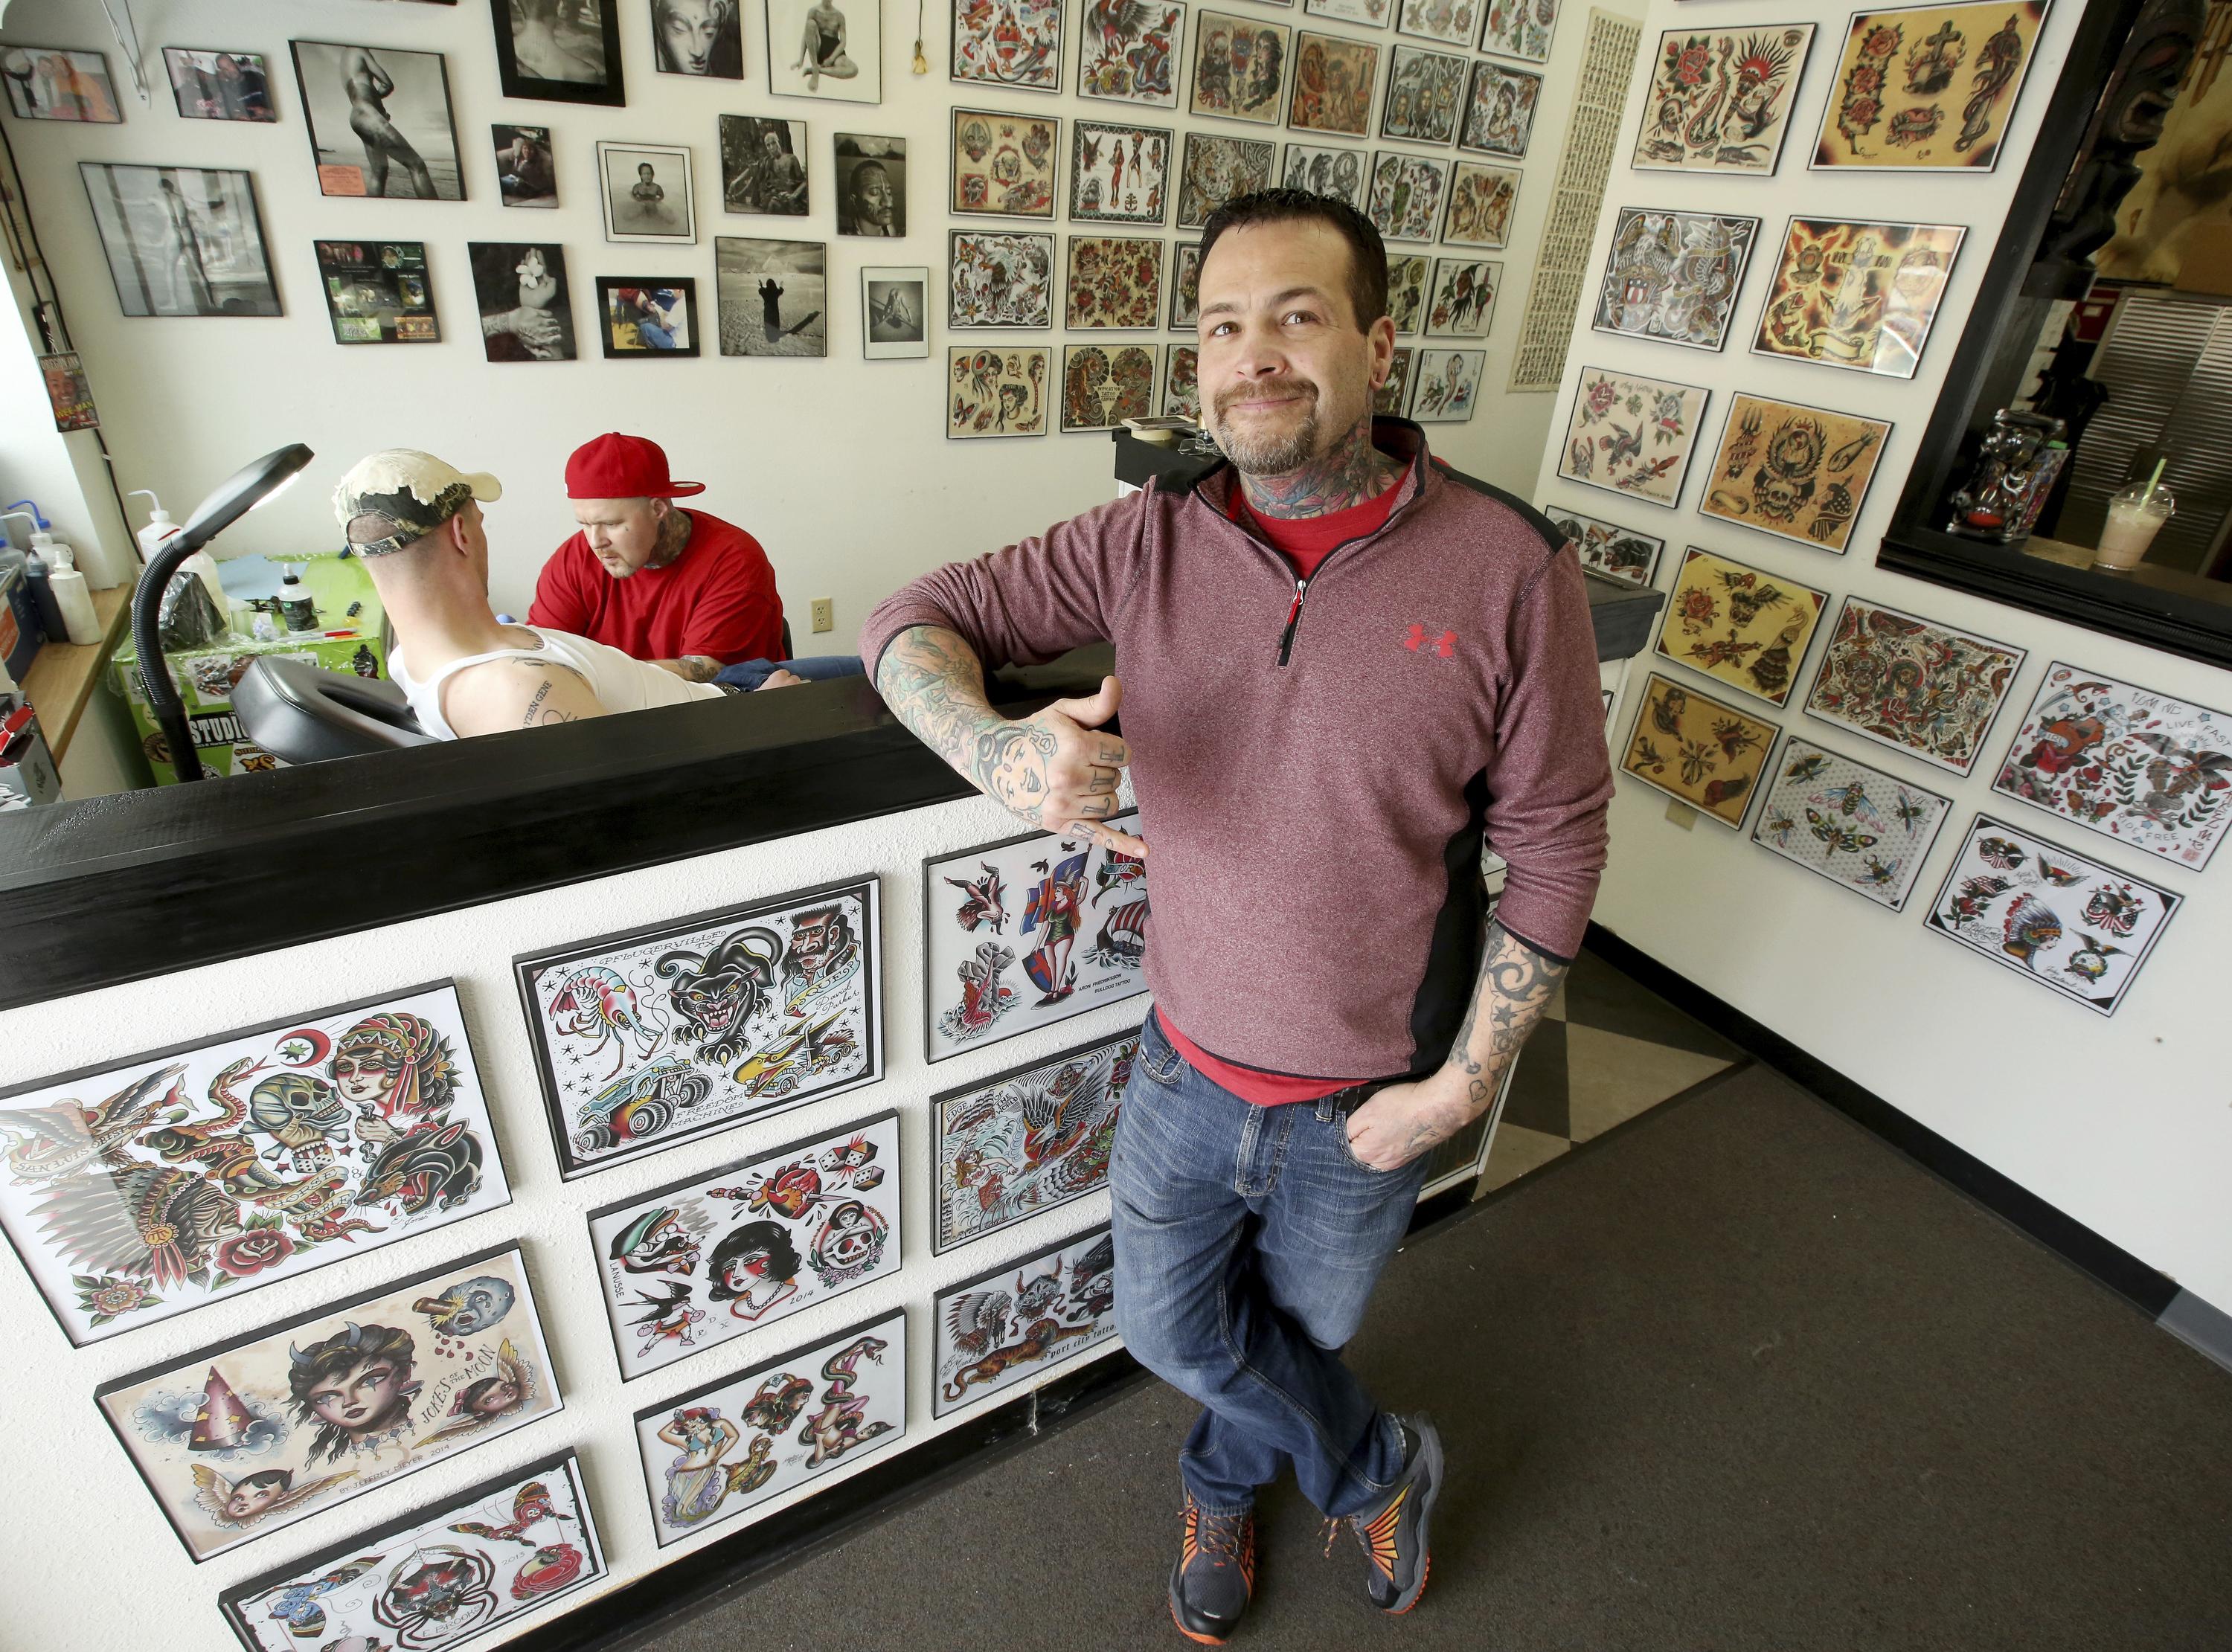 Fairbanks tattoo shop: What you get is what you see - Washington Times